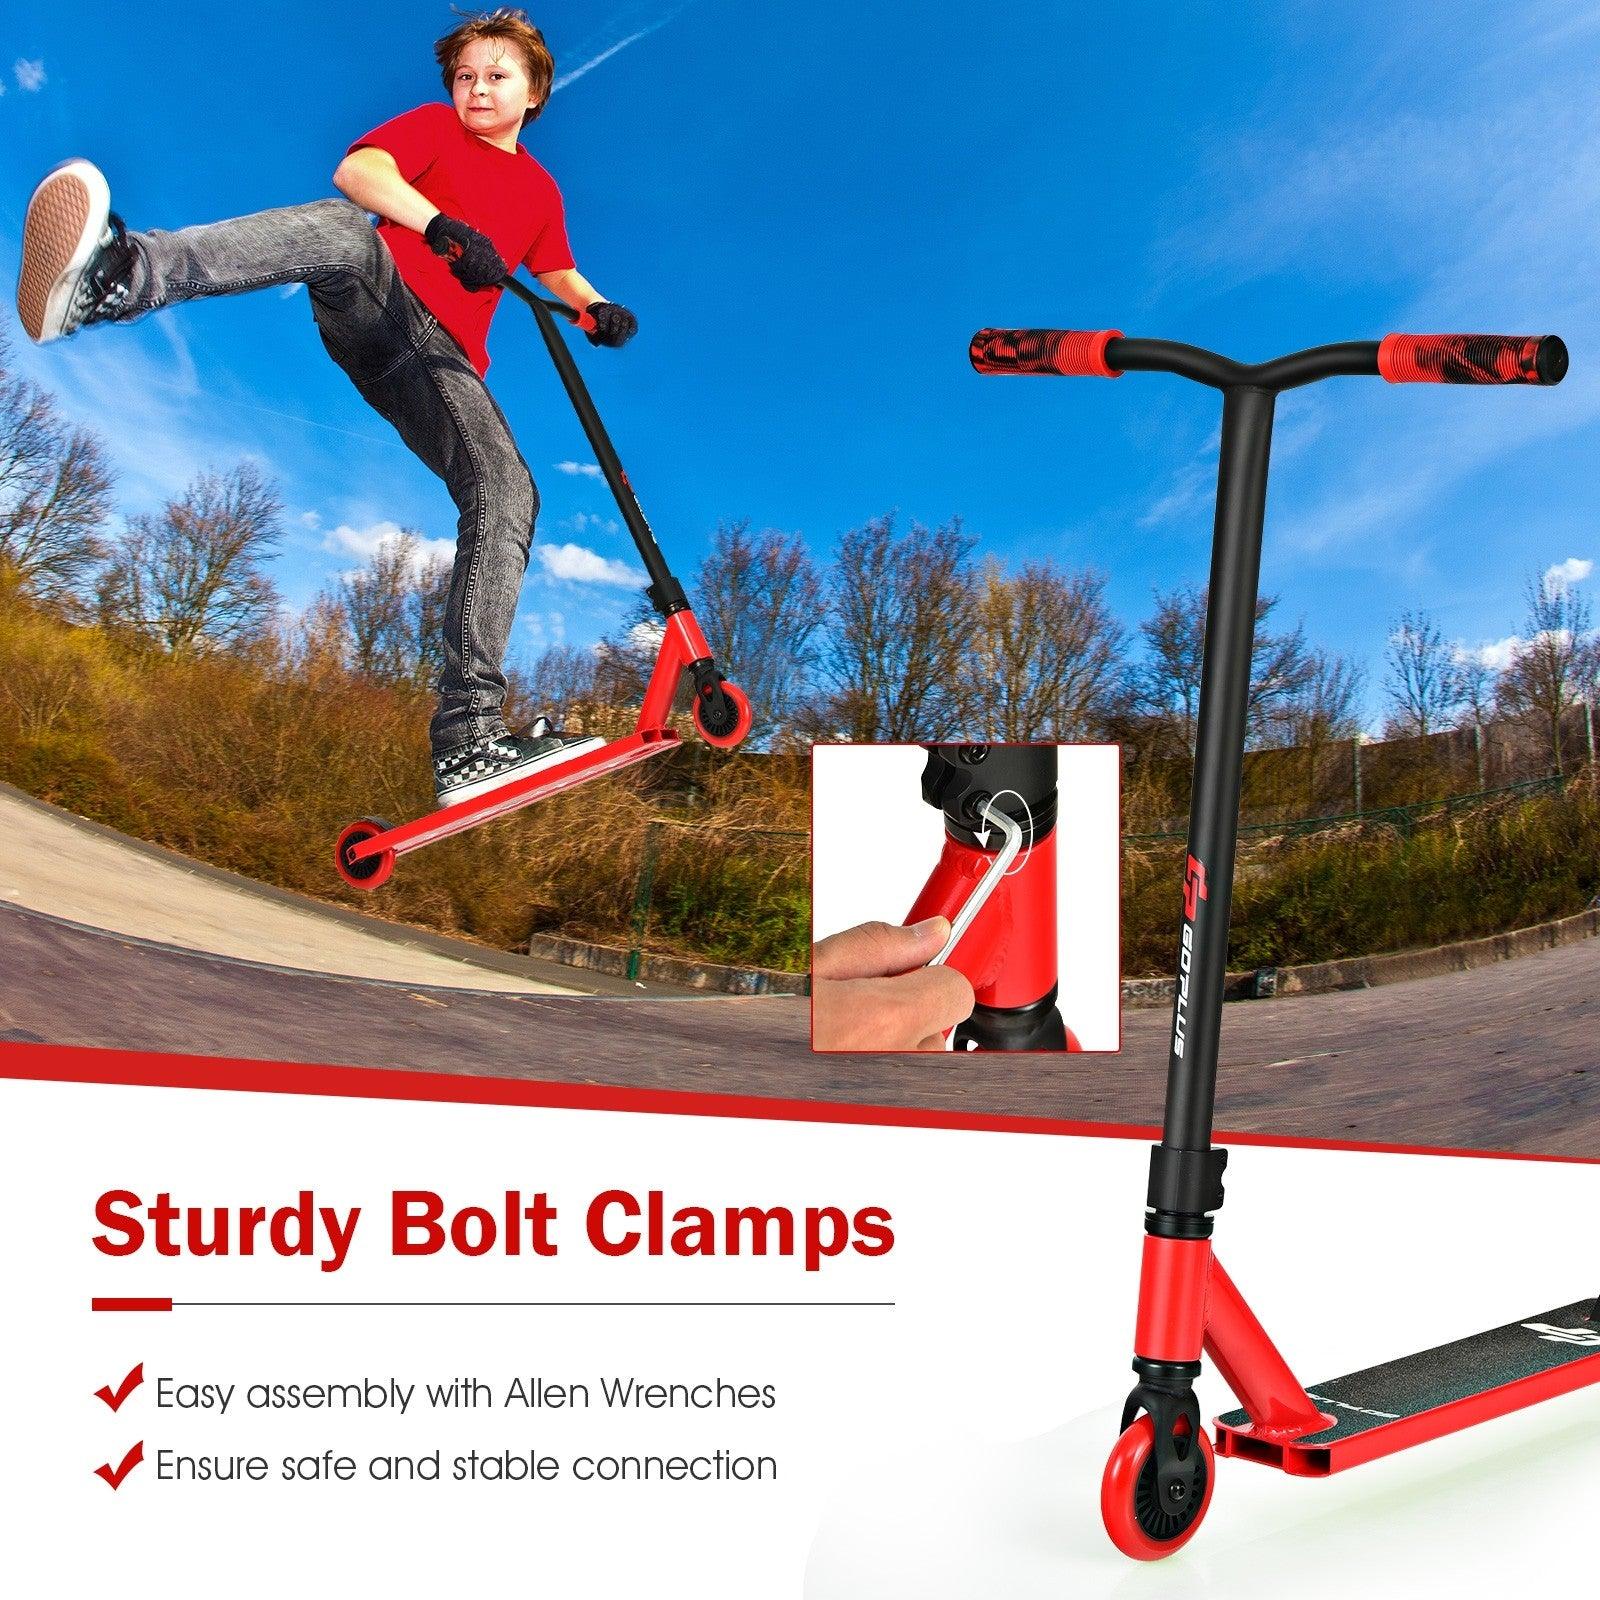 High-End Pro Stunt Scooter SP37732, Trick Scooter with ABEC-9 Bearings - YOURISHOP.COM